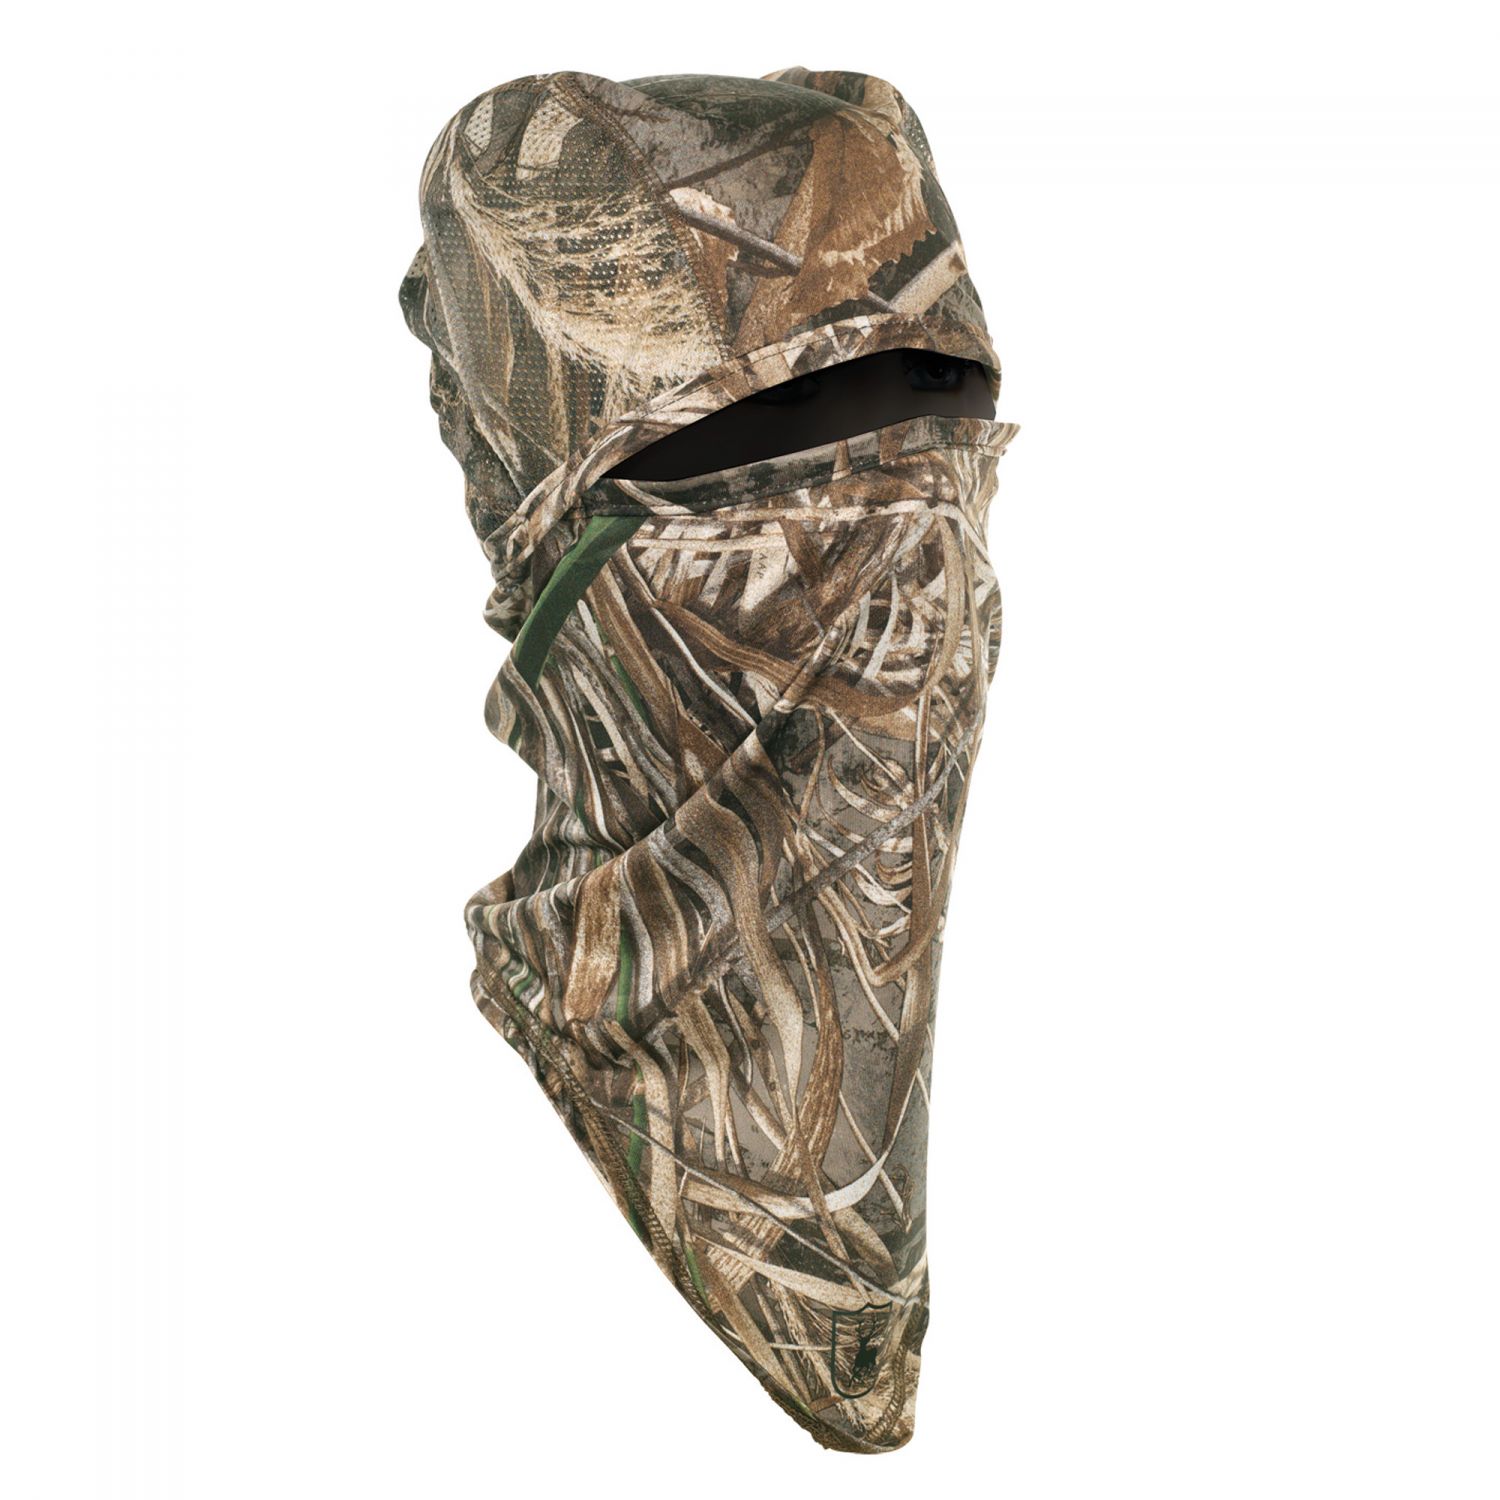 Gesichtsmaske Max-5 Realtree Max-5 Camo one size